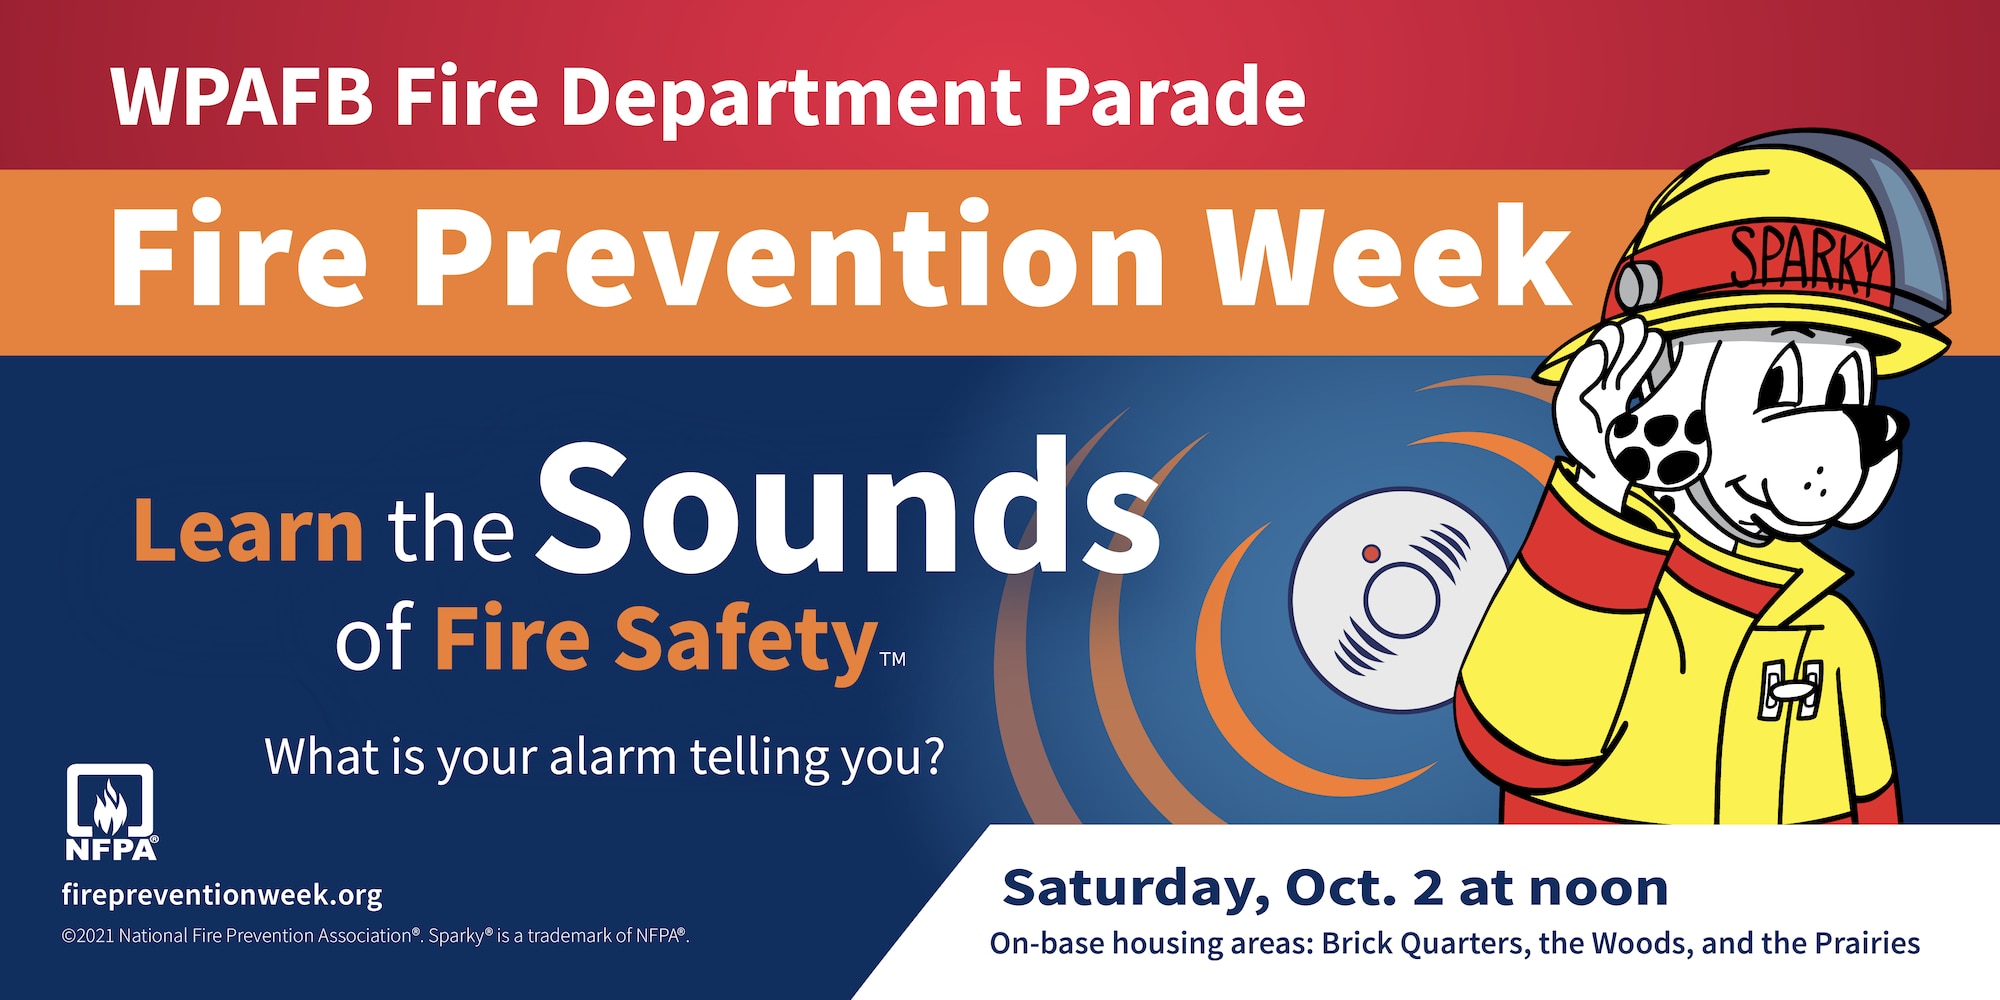 WPAFB Fires Safety Week October 2, 2021 at noon